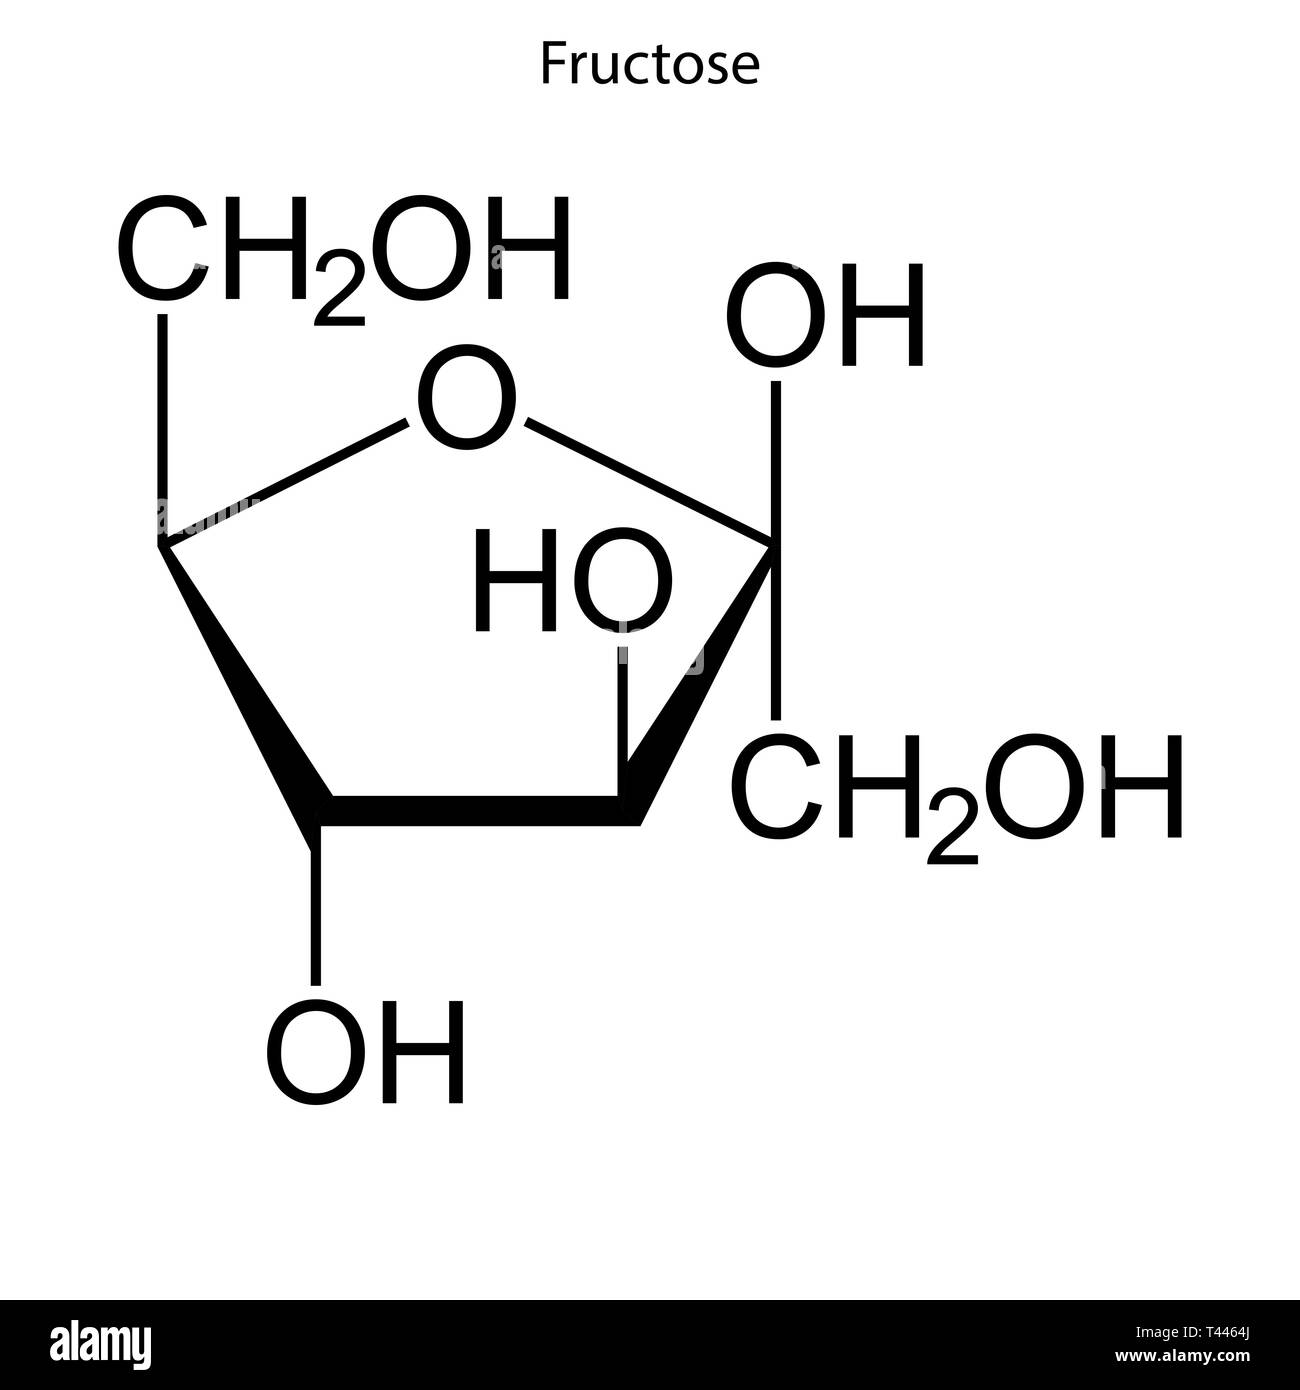 The Sugar Association - Sucrose = one molecule of glucose + one molecule of  fructose, bound together by Mother Nature. https://bit.ly/38Hml0q | Facebook